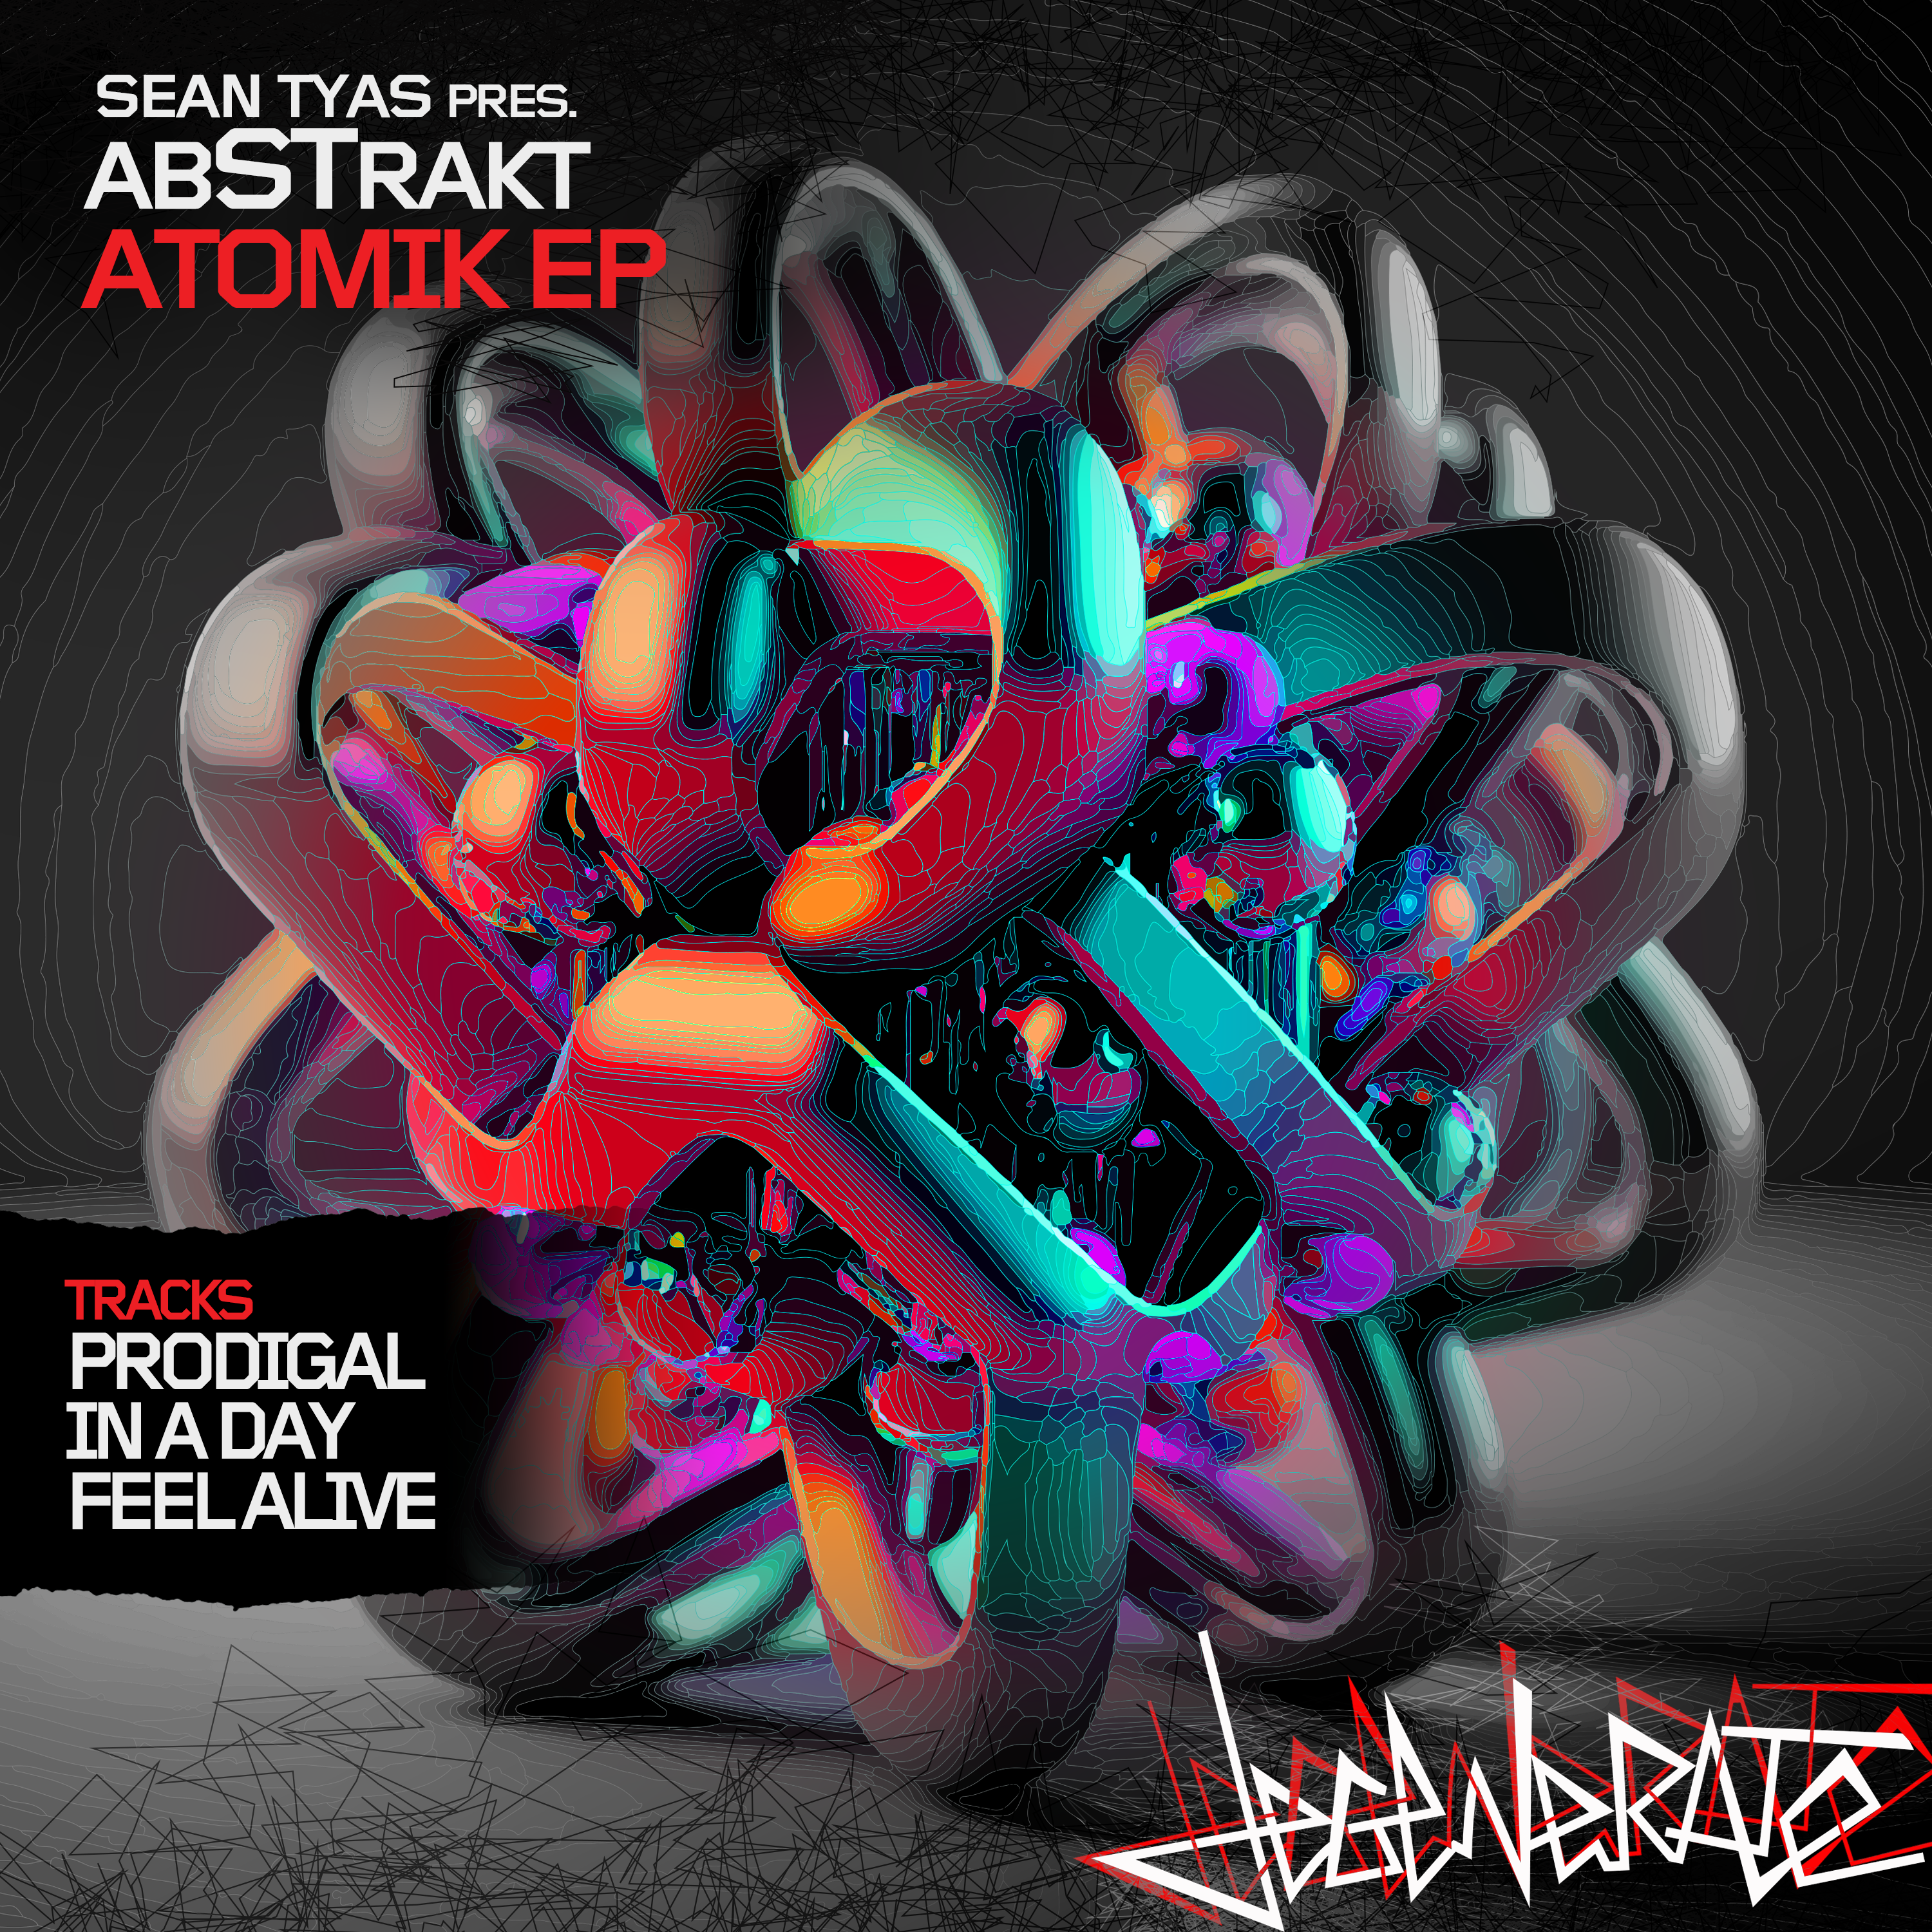 Sean Tyas Presents ABSTRAKT – The Back to the '90s “ATOMIC EP”